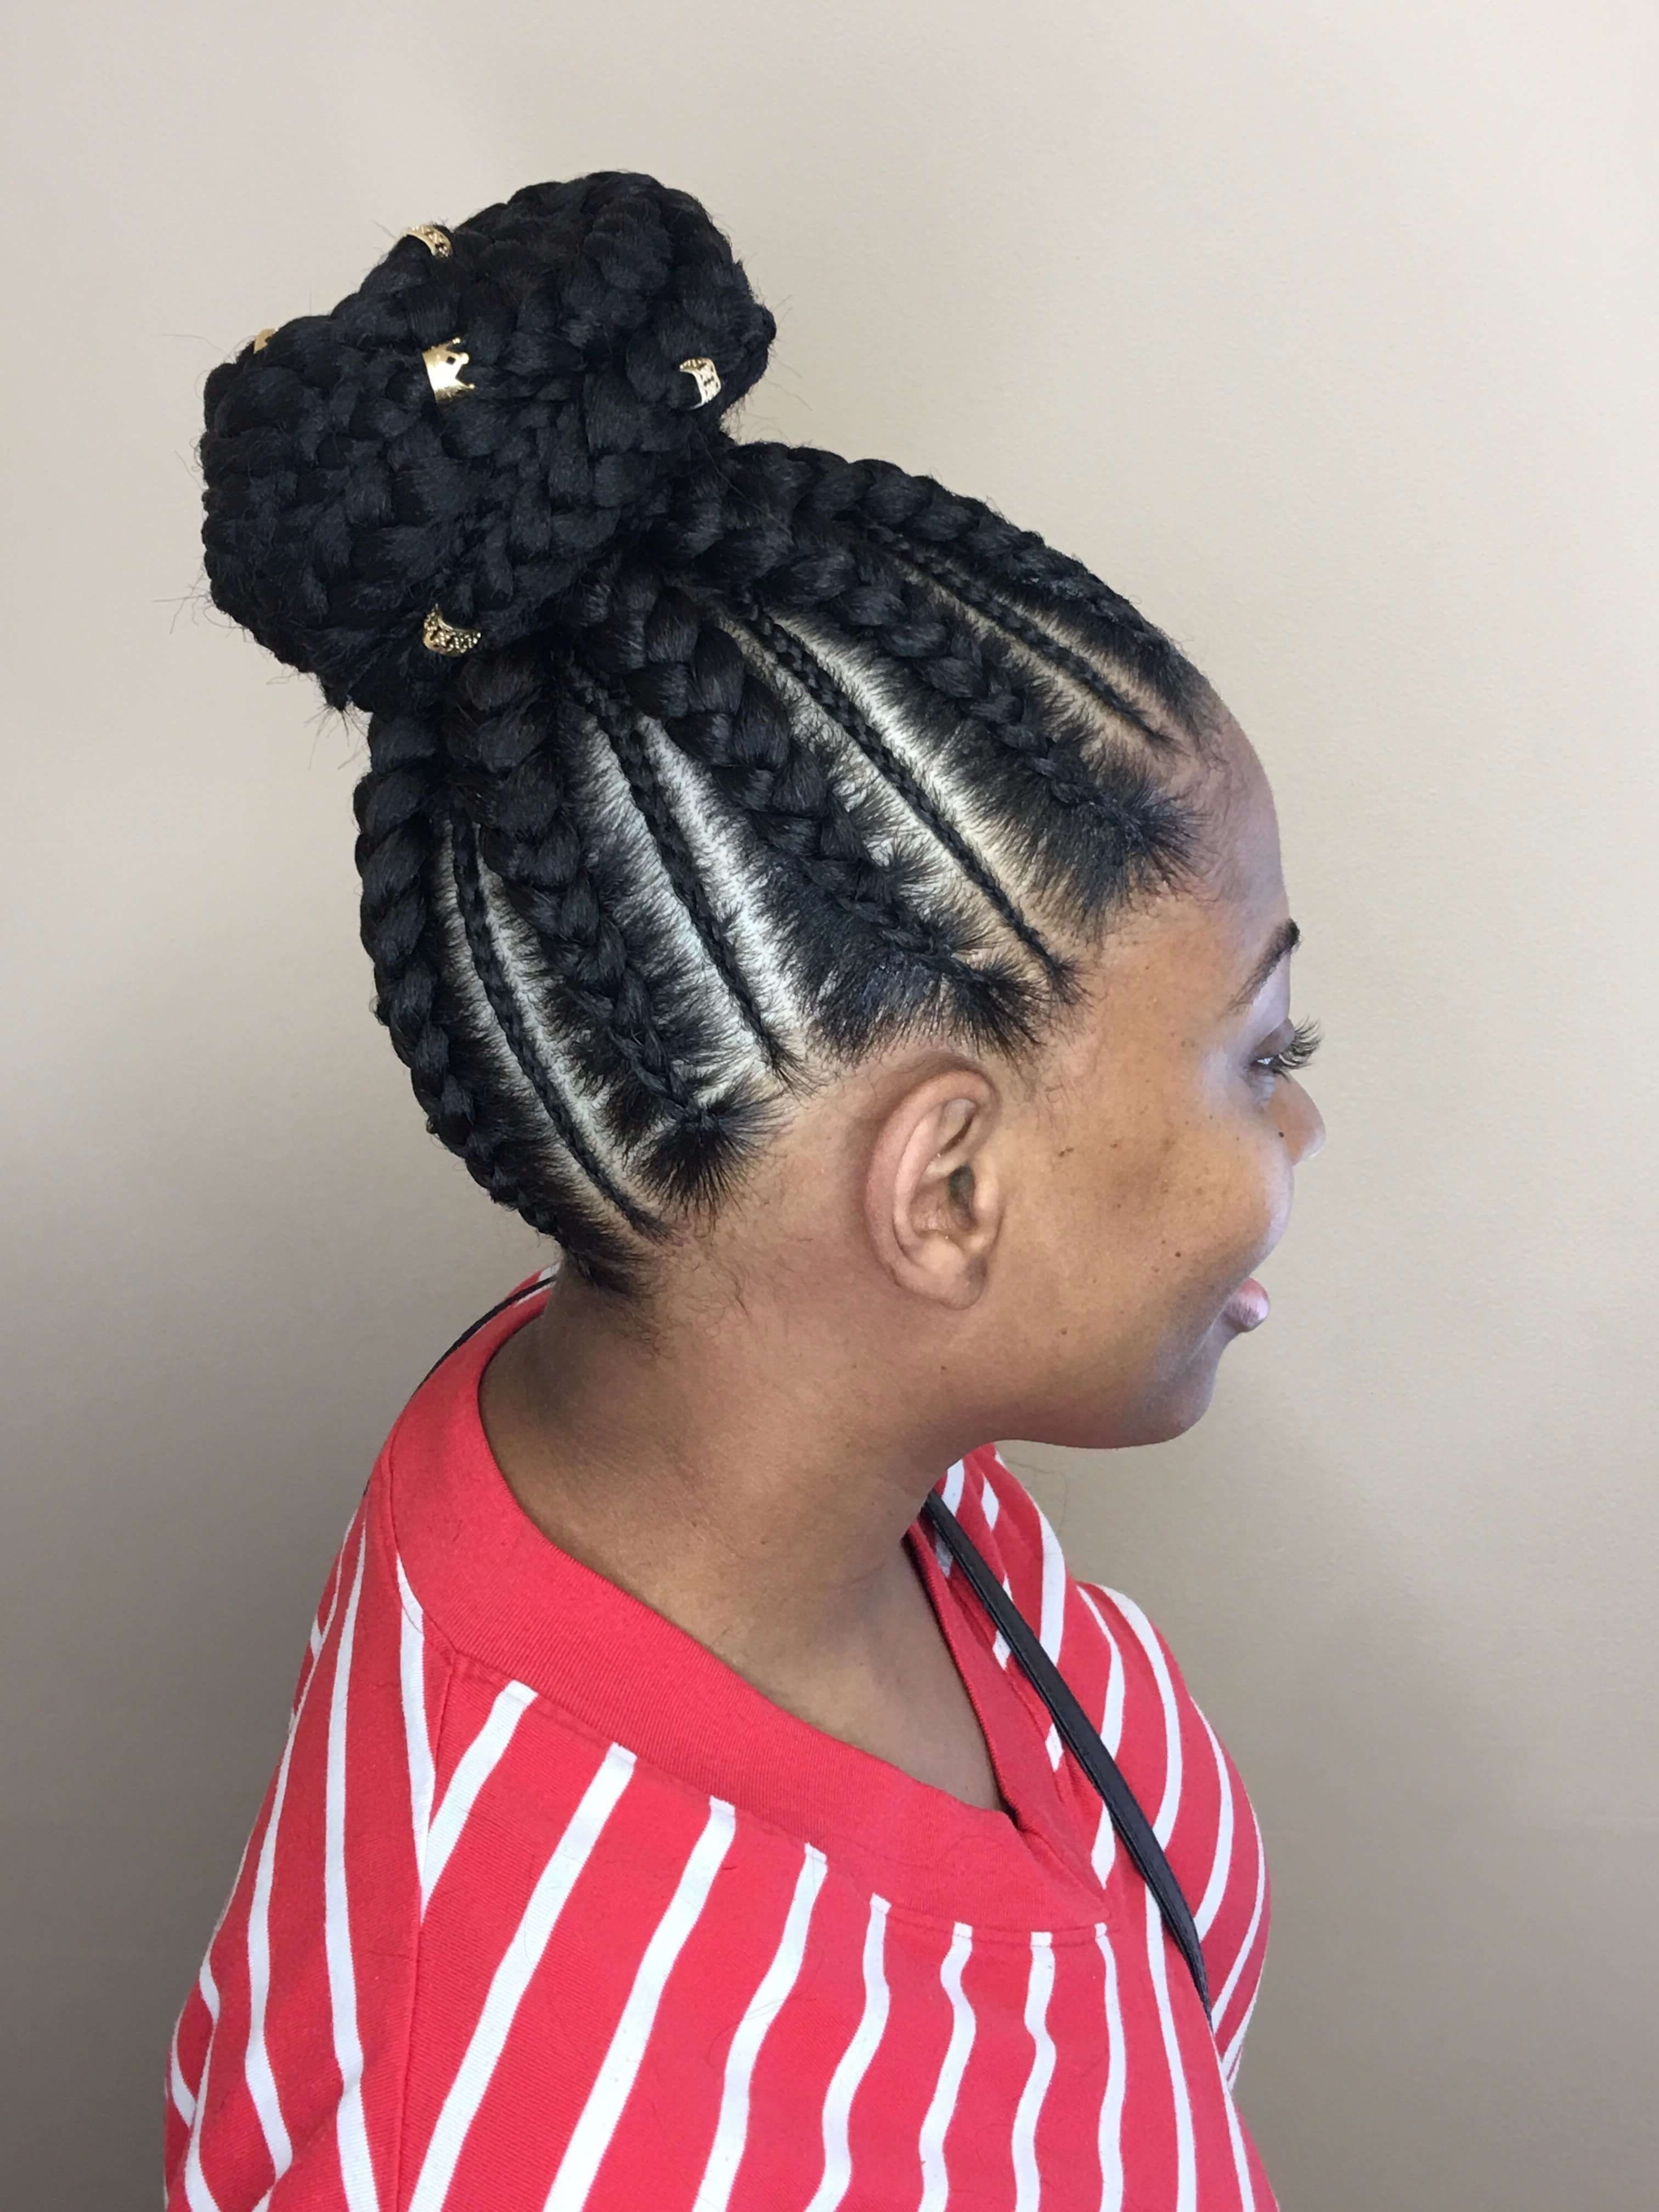 50 Natural Goddess Braids To Bless Ethnic Hair In 2018 Pertaining To 2017 Twin Braid Updo Hairstyles (View 15 of 15)